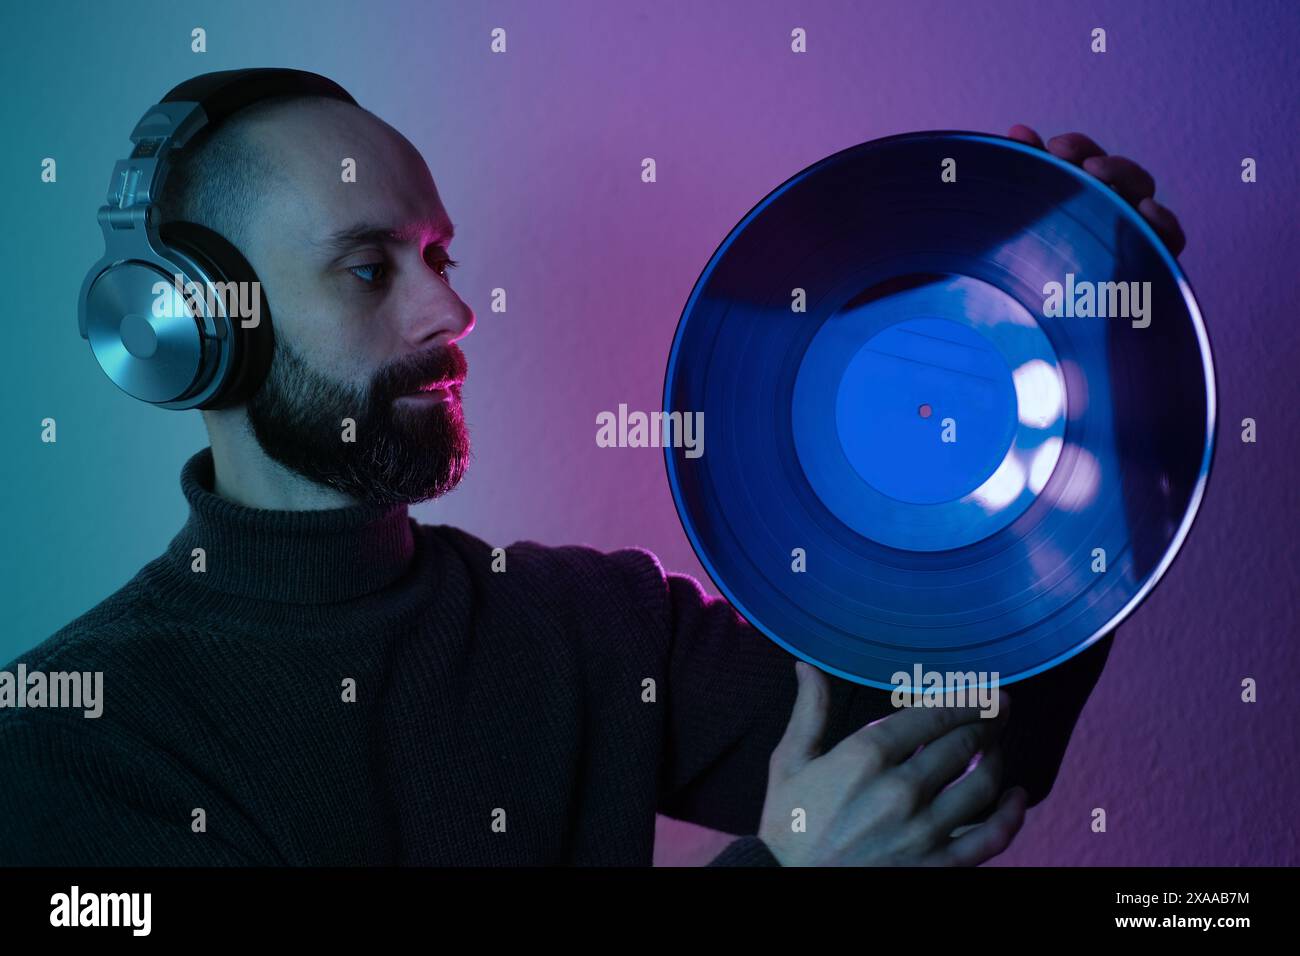 Vintage vinyl disc in hands of Young man with beard in headphones, contemplatively looking in neon purple and green light, Neon-lit contemplation, cri Stock Photo